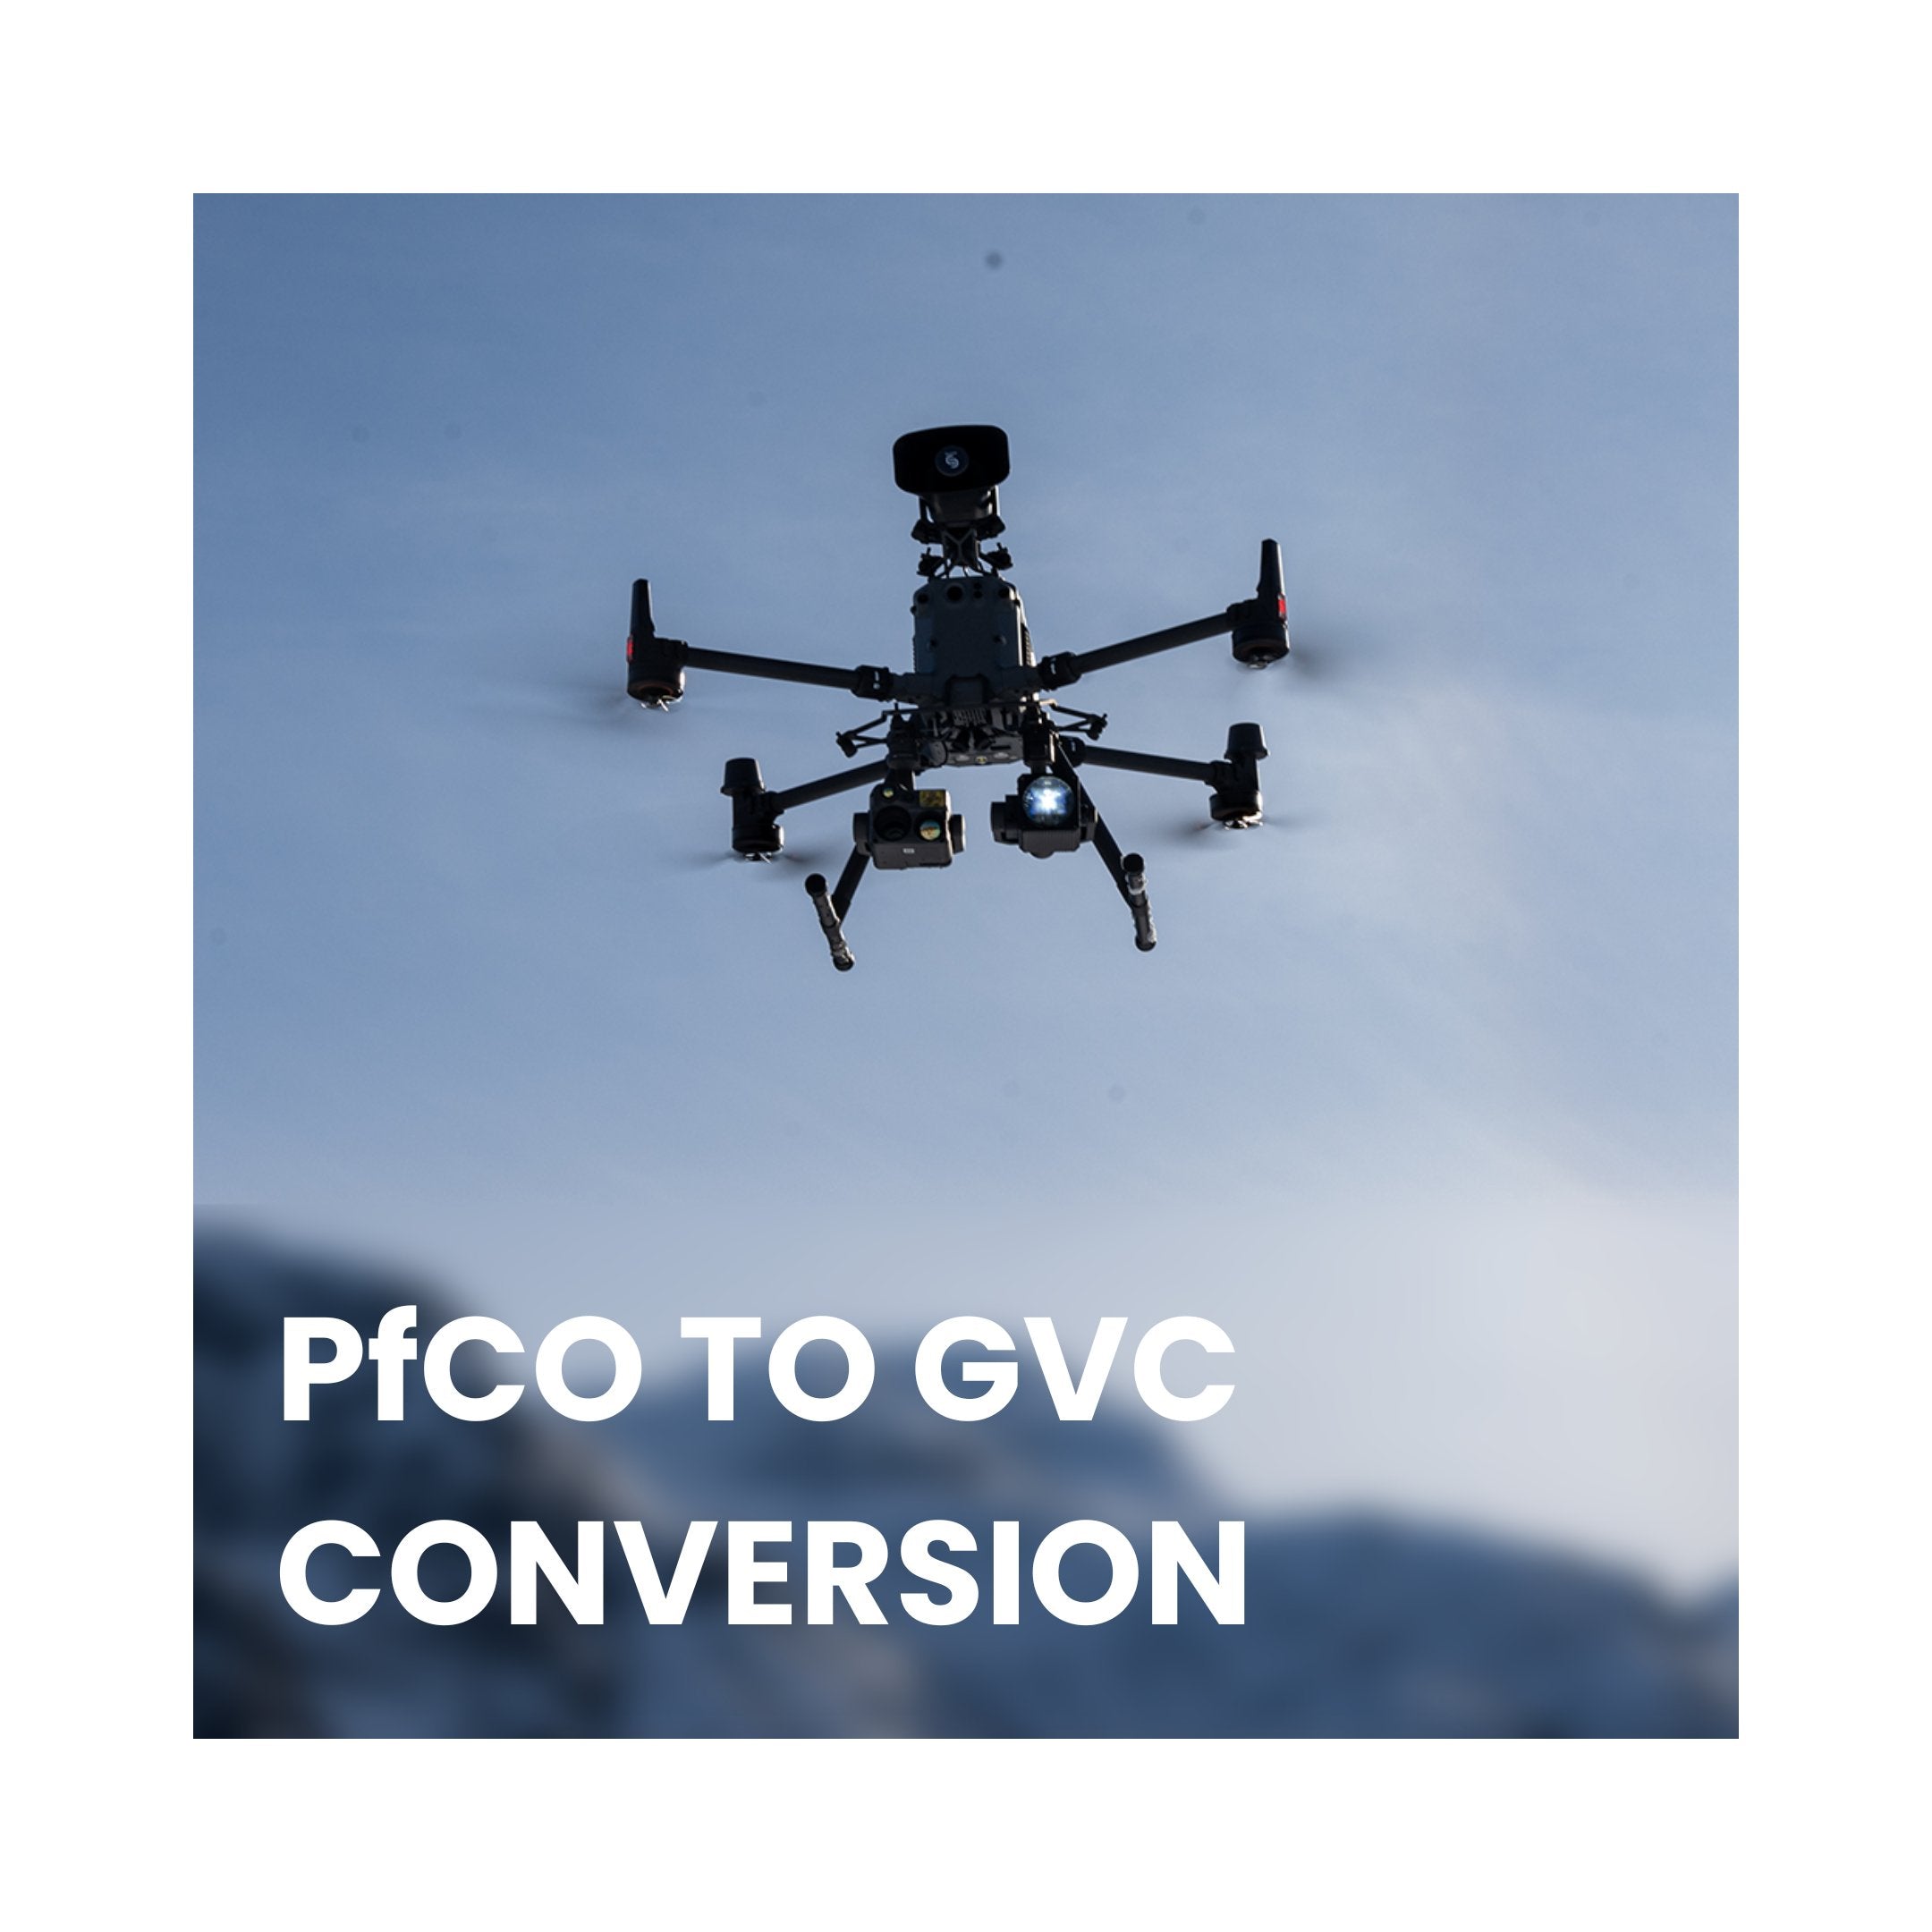 PFCO to GVC Conversion - iRed Limited